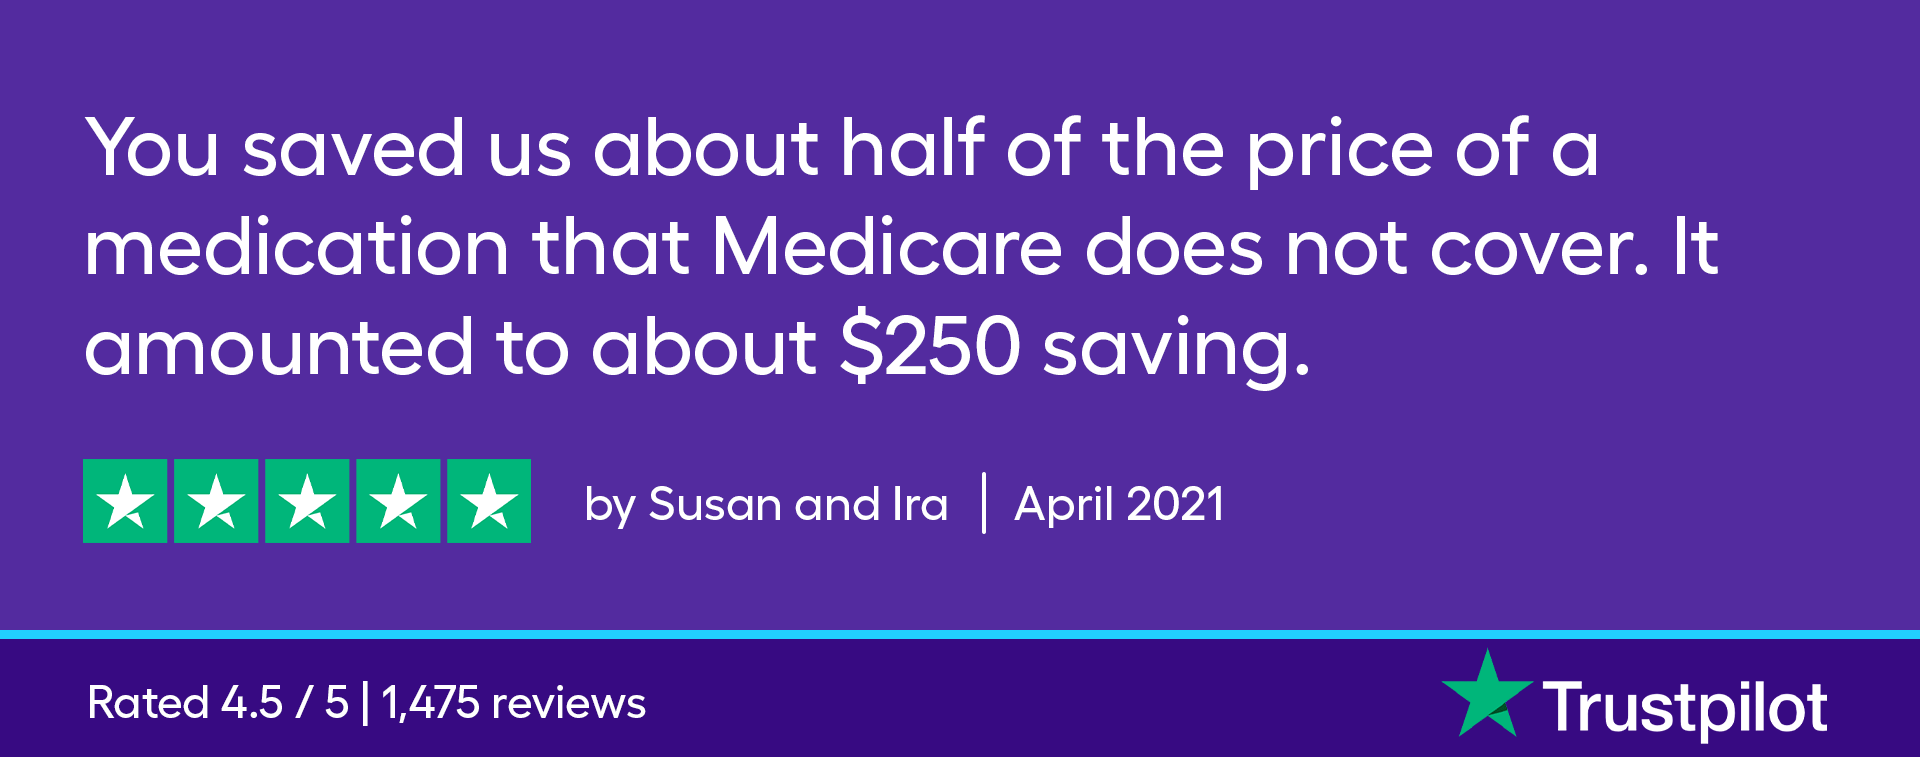 You saved us about half of the price of a medication that Medicare does not cover. It amounted to saving about $250.